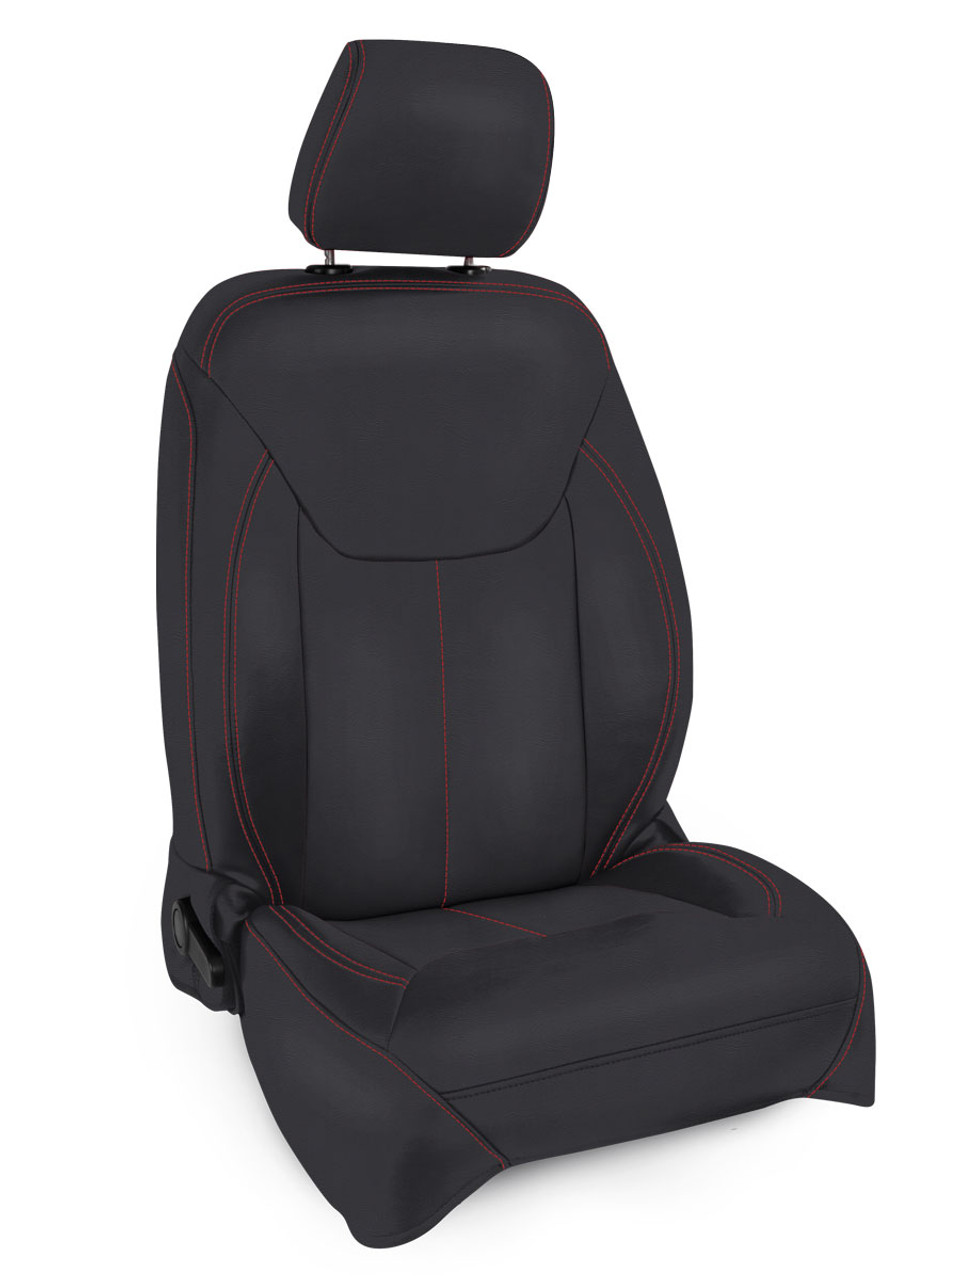 Front Seat Covers for '13'18 Jeep Wrangler JK, 2 door or 4 door (Pair) - Black with Red Stitching